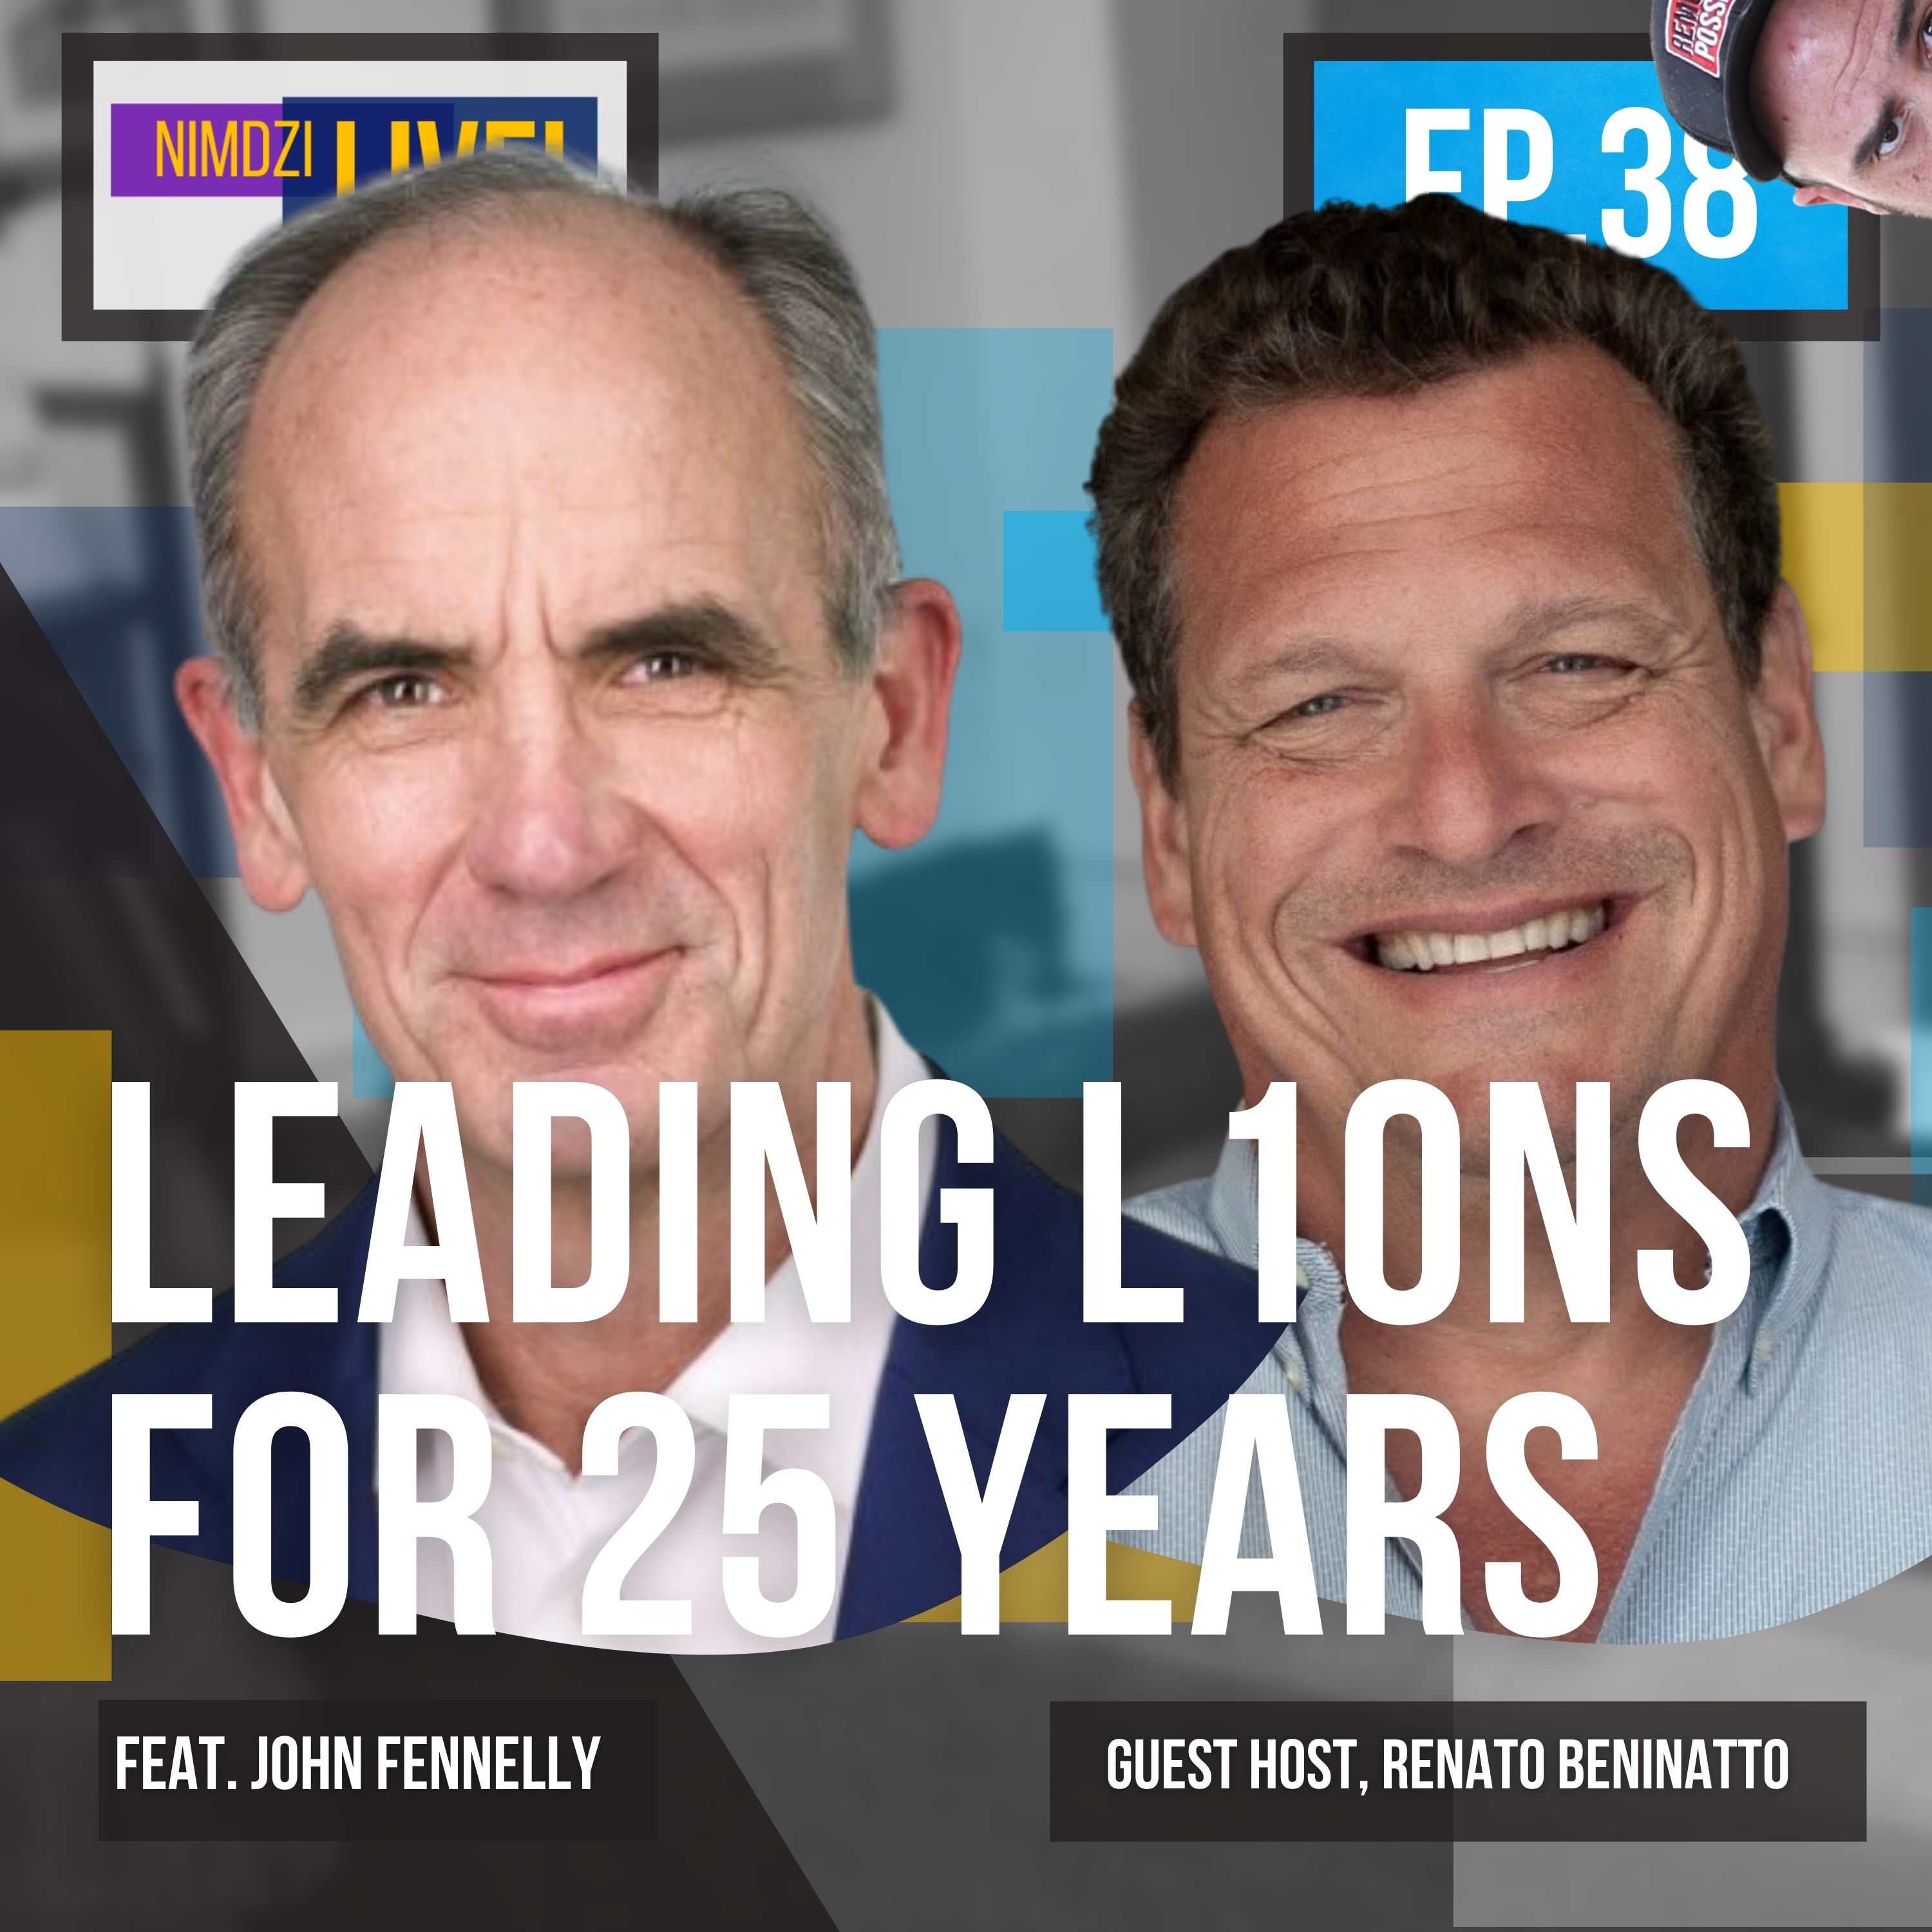 Leading L10ns for 25 Years feat. John Fennelly, CEO of Lionbridge